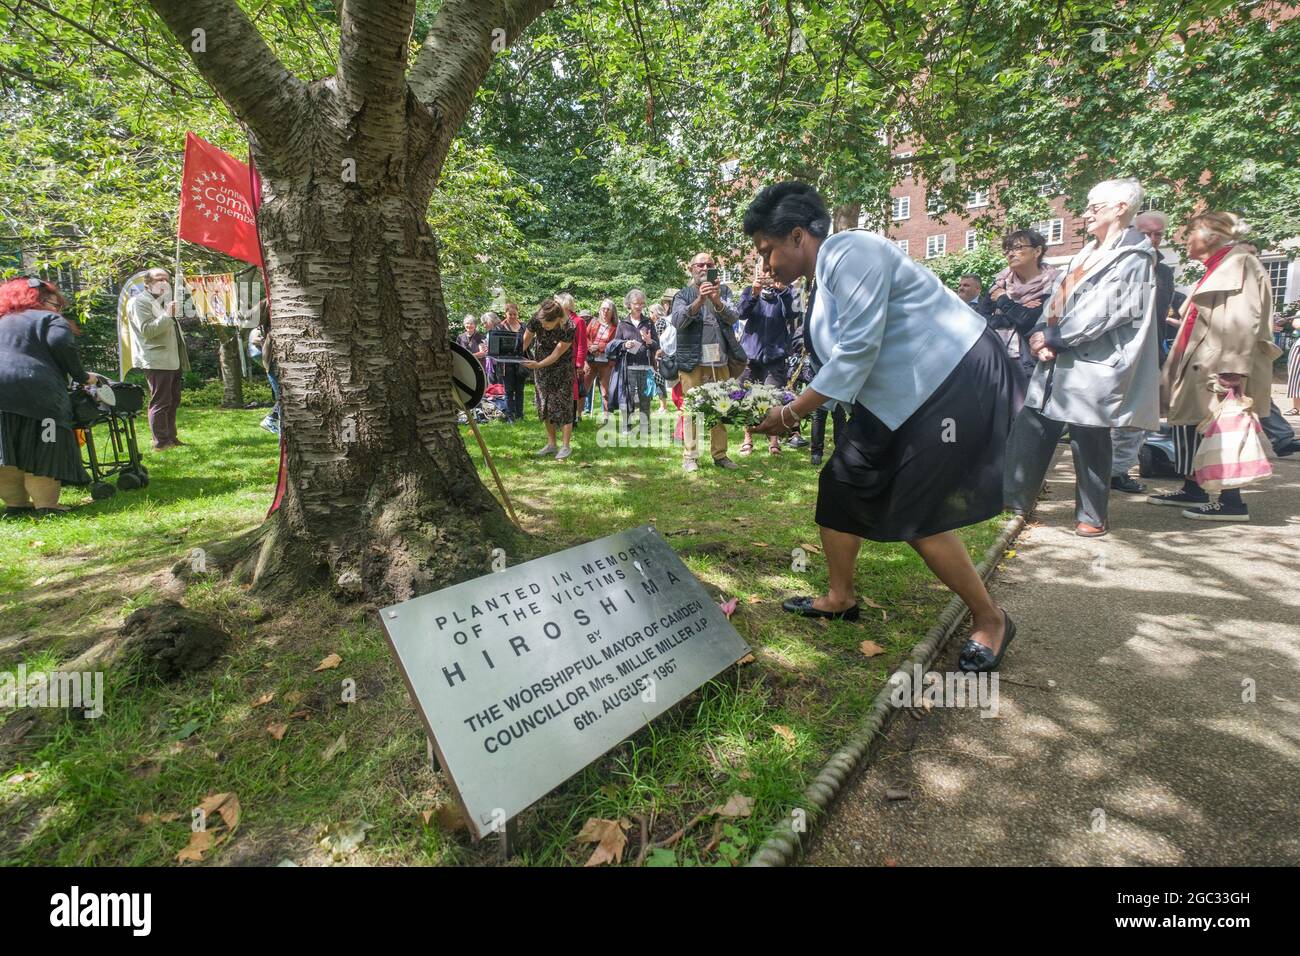 London, UK. 6th August 2021. Sabrina Francis, Mayor of Camden lays a wreath at the Hiroshima Cherry Tree. 76 years after atomic bombs were dropped on Hiroshima and Nagaski, London CND met in Tavistock Square to remember the many killed and survivors who are still suffering the event, and to celebrate the UN treaty prohibiting nuclear weapons which came into force this January. They called on the government to end the UK's nuclear weapon programme. Peter Marshall/Alamy Live News Stock Photo